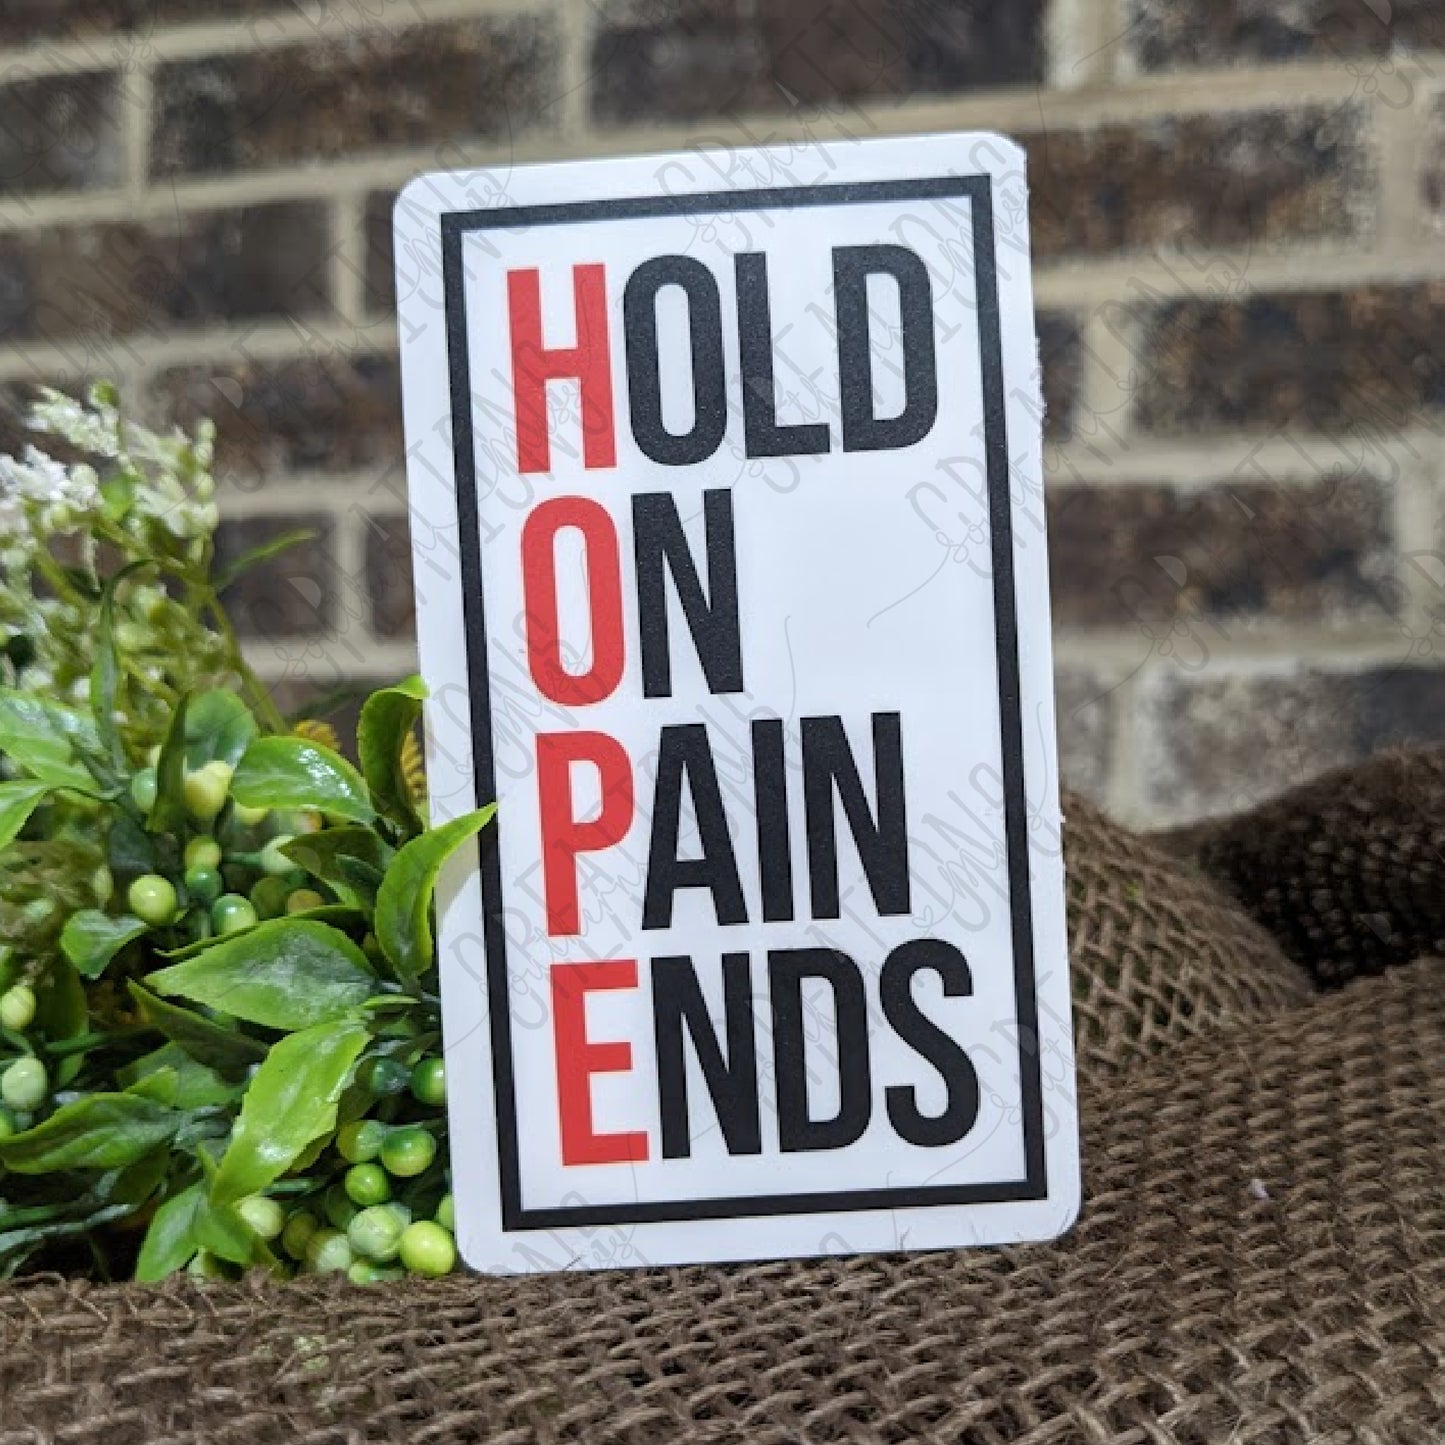 HOPE: Hold On Pain Ends